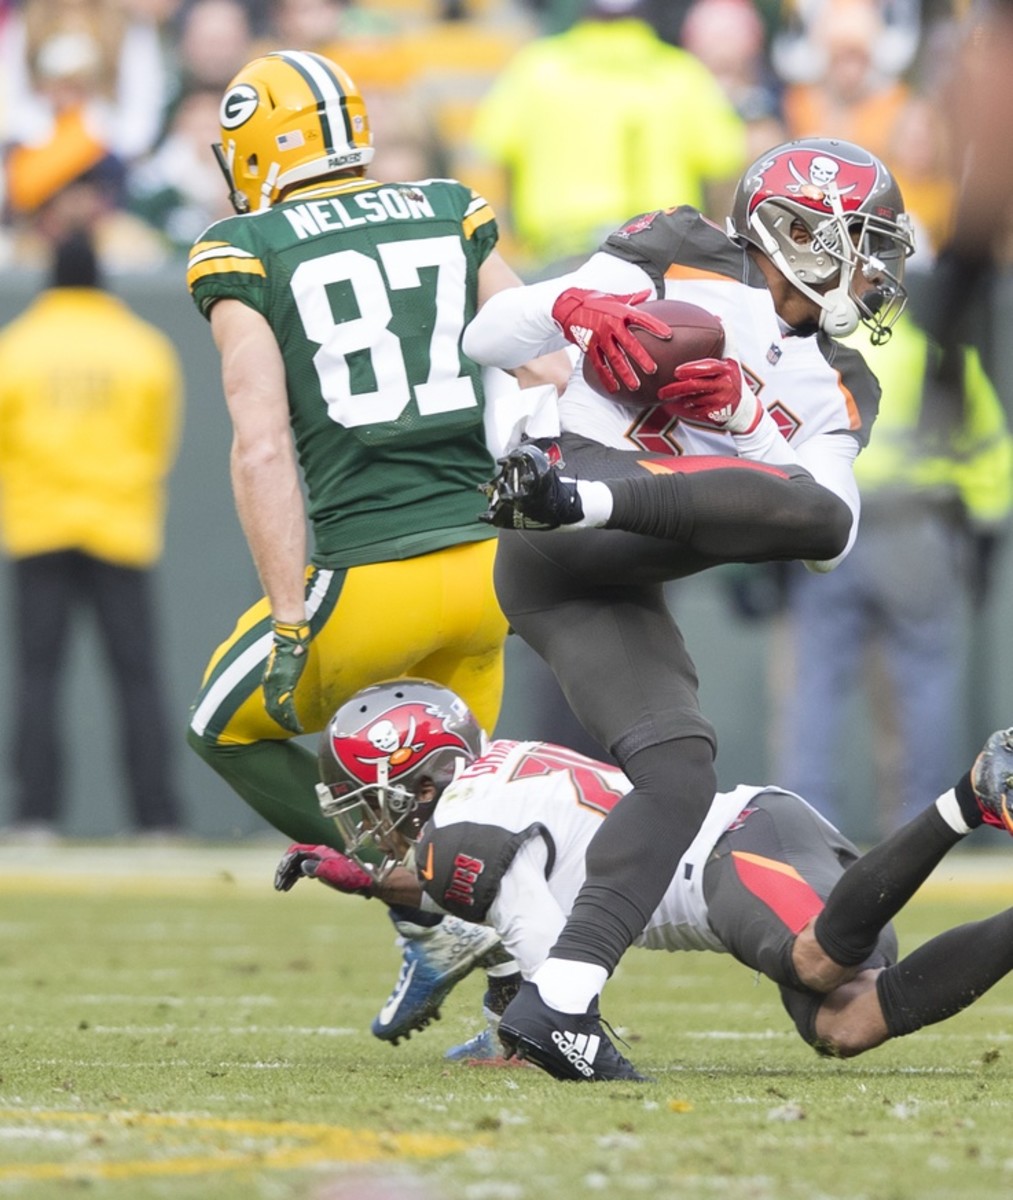 Former Tampa Bay Buccaneers safety Justin Evans (21) intercepts a pass against the Green Bay Packers. Mandatory Credit: Jeff Hanisch-USA TODAY Sports